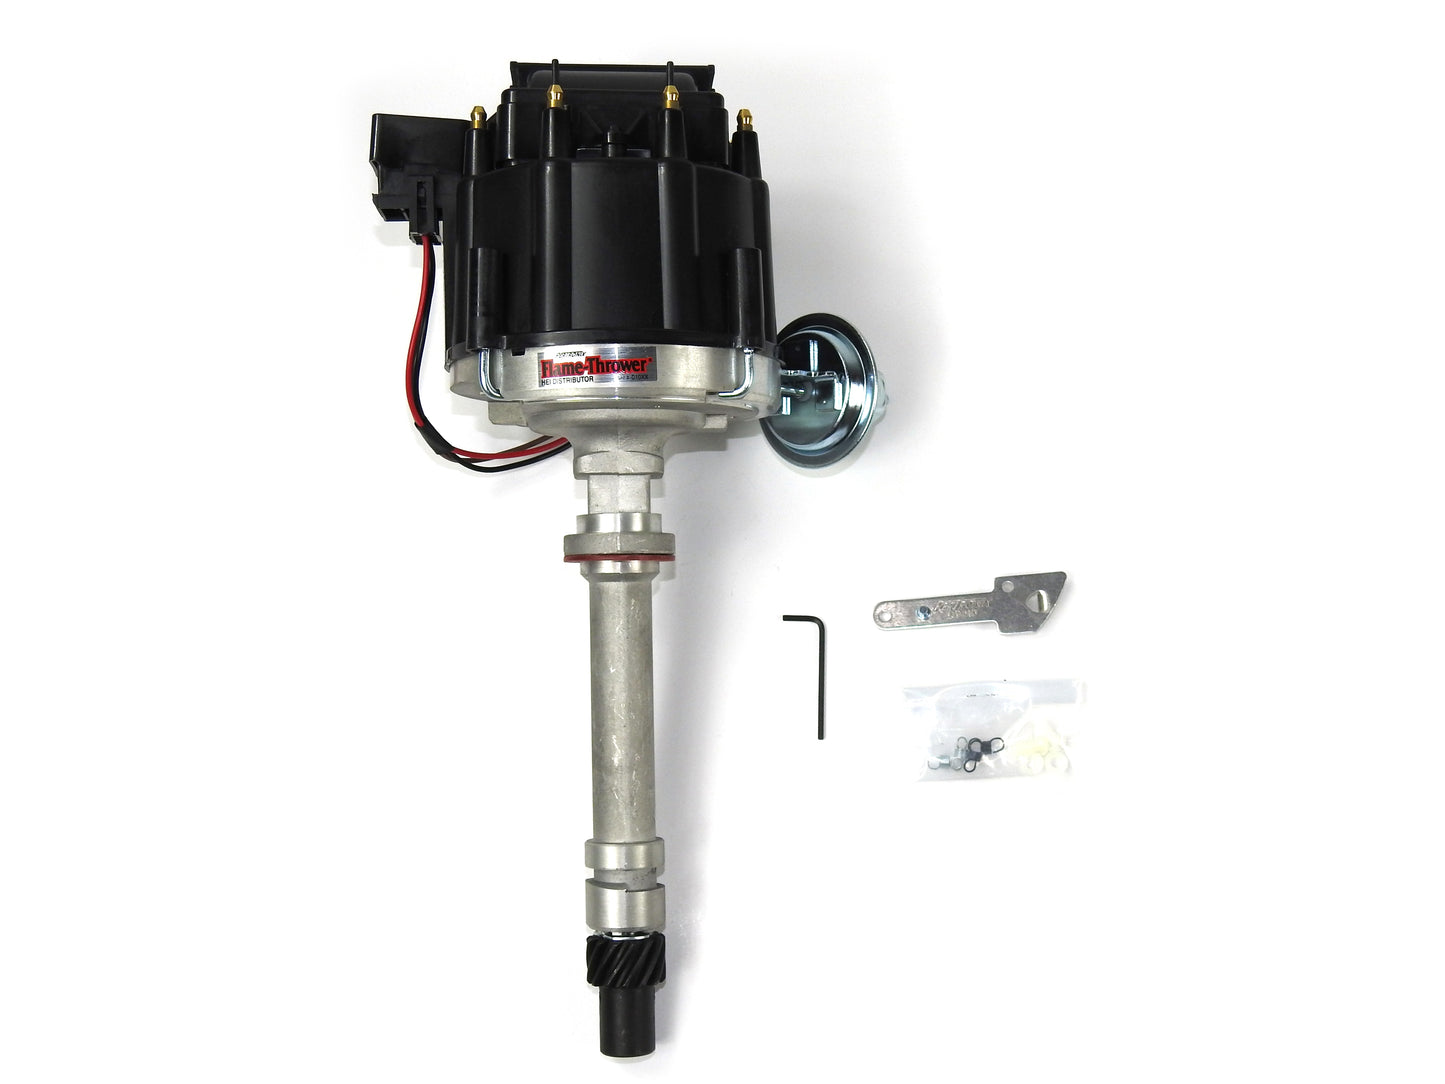 PERTRONIX D 1075 FLAME-THROWER "IMCA APPROVED" RACE HEI DISTRIBUTOR FOR CHEVY SB/BB. CAST FINISH. VACUUM ADVANCE. BLACK CAP. OEM STYLE COIL COVER.